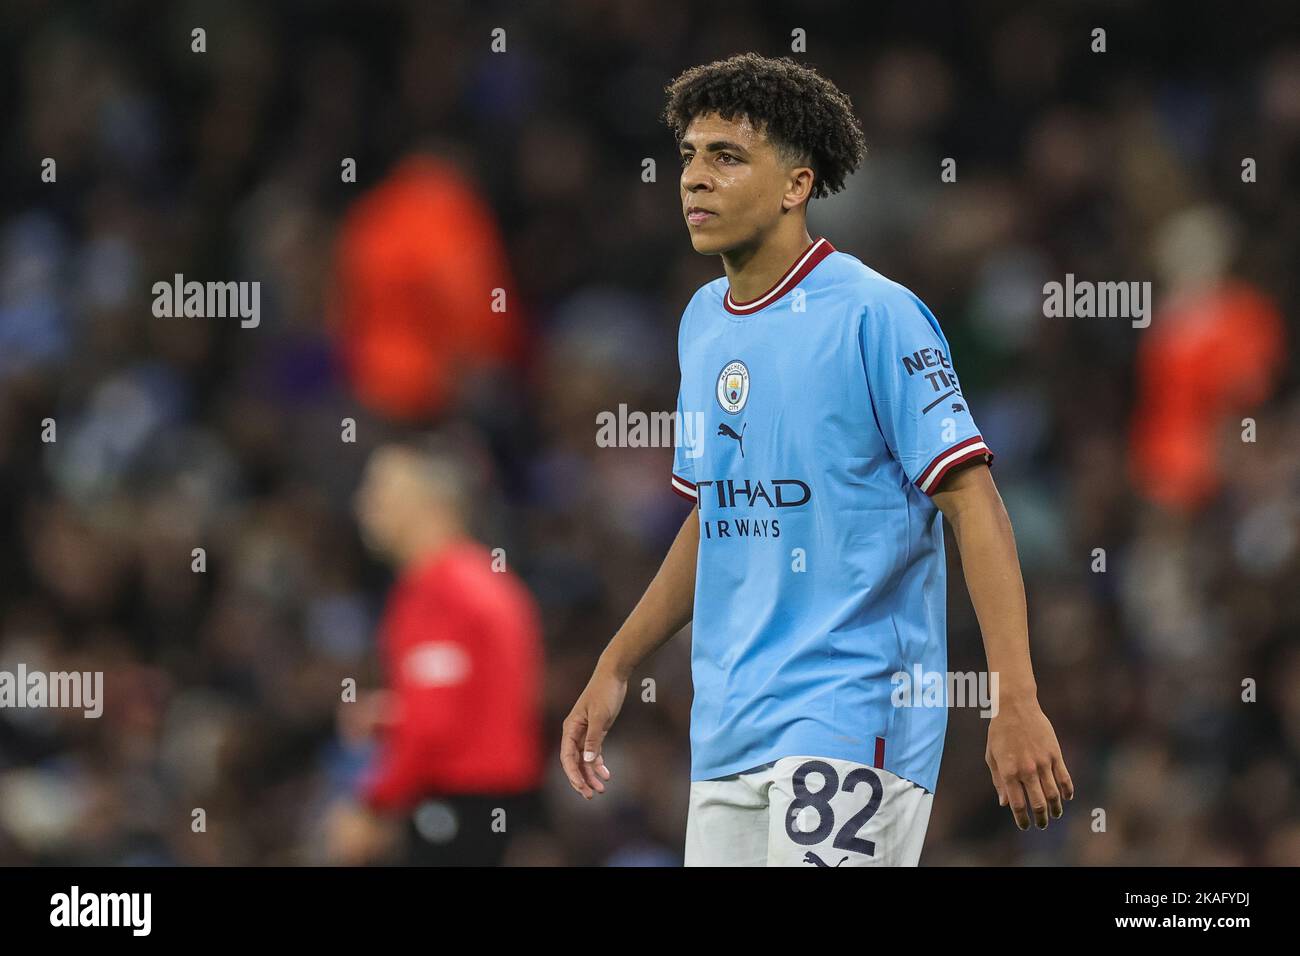 Rico Lewis #82 of Manchester City during the UEFA Champions League match Manchester City vs Sevilla at Etihad Stadium, Manchester, United Kingdom, 2nd November 2022  (Photo by Mark Cosgrove/News Images) Stock Photo